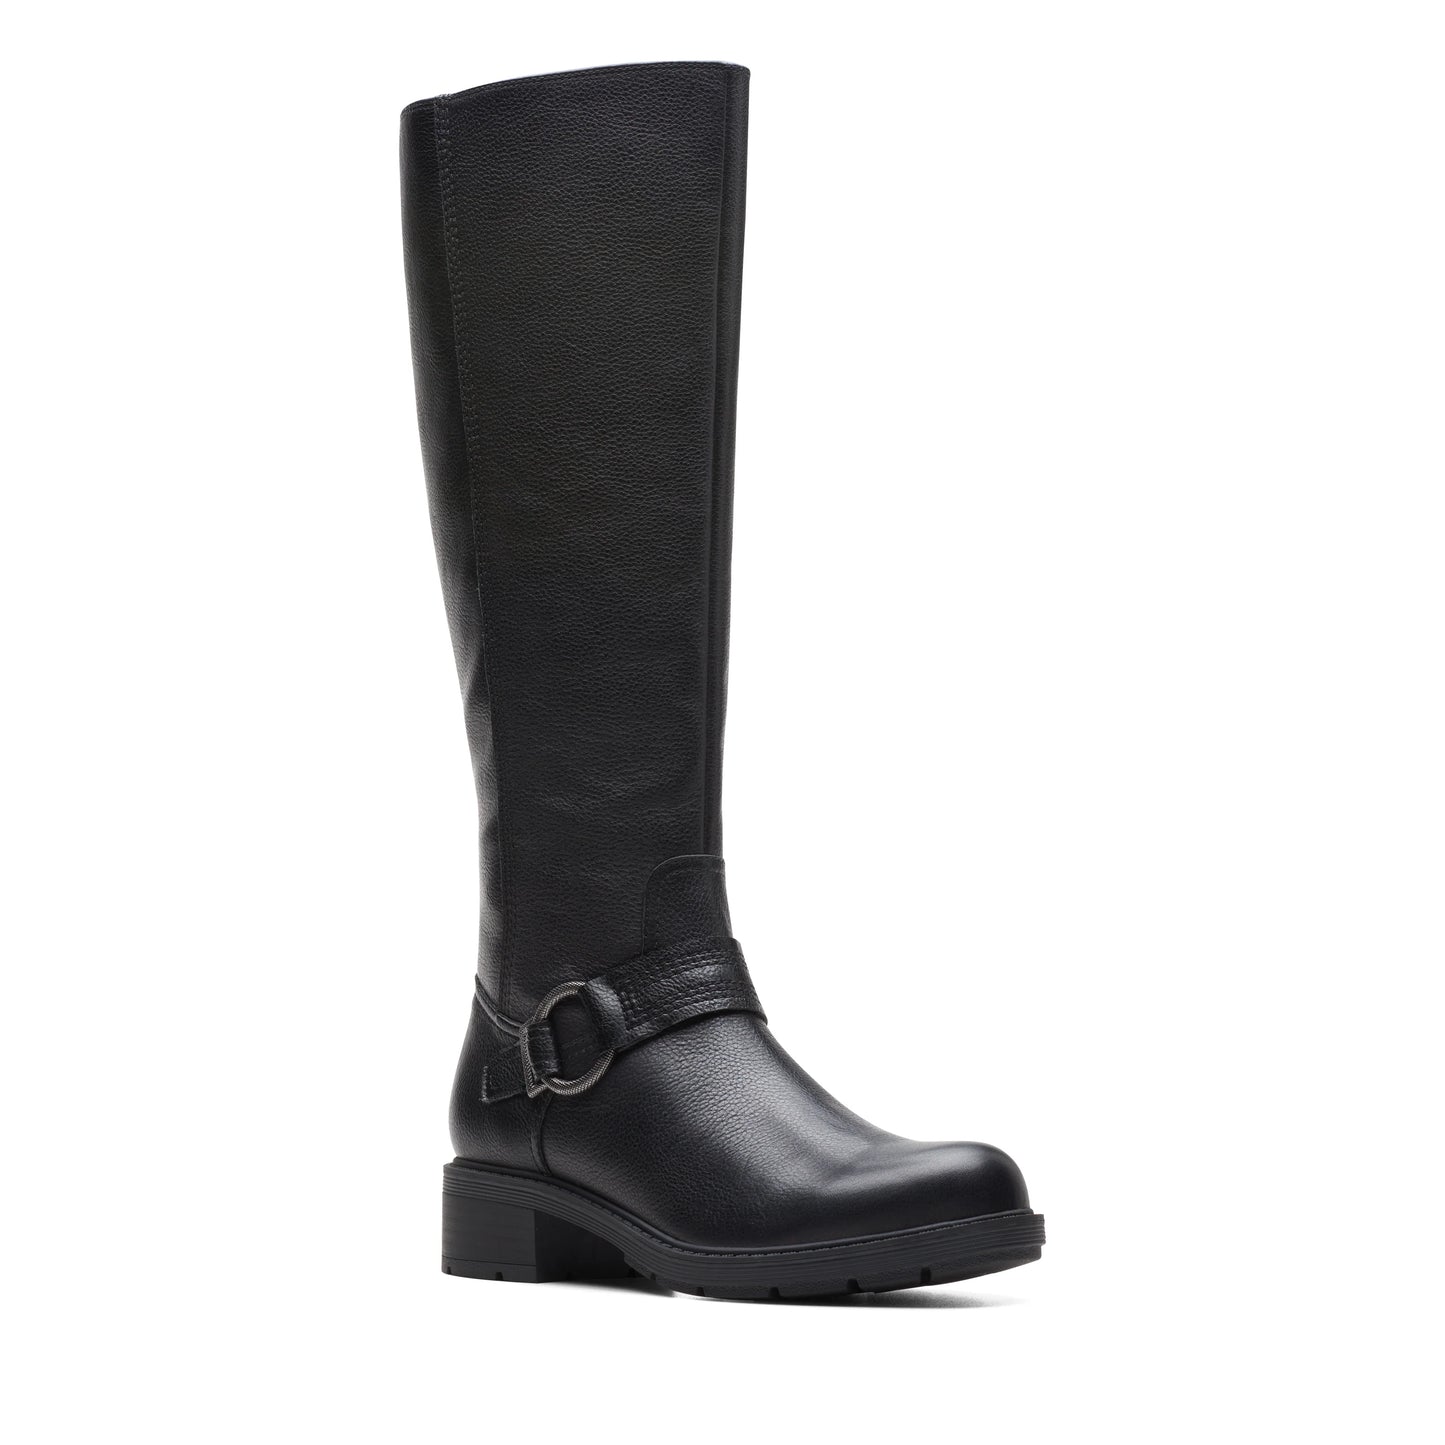 CLARKS | BOTAS MUJER | HEARTH RAE BLACK LEATHER BLACK LEATHER | NEGRO